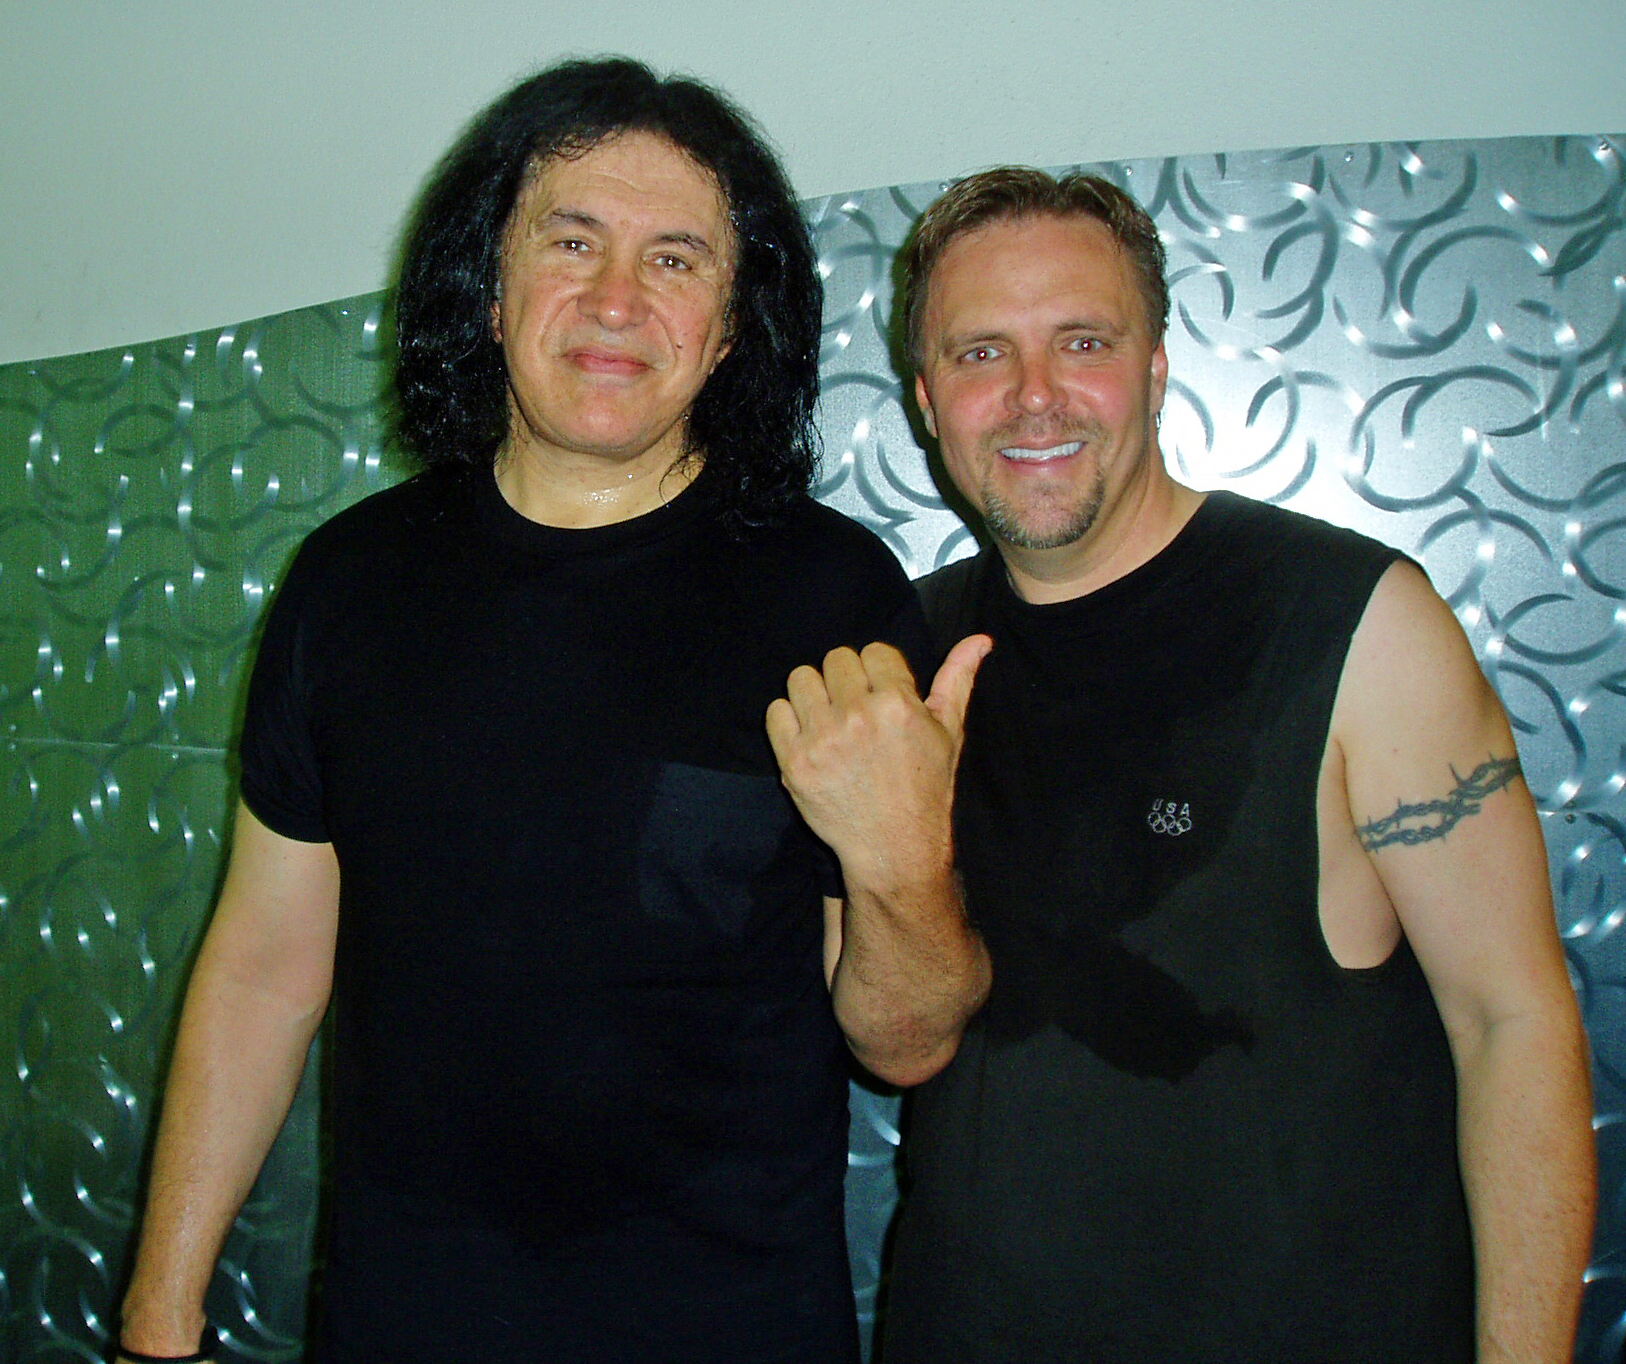 Michael Gier with Gene Simmons (KISS) after playing a game of racquetball.